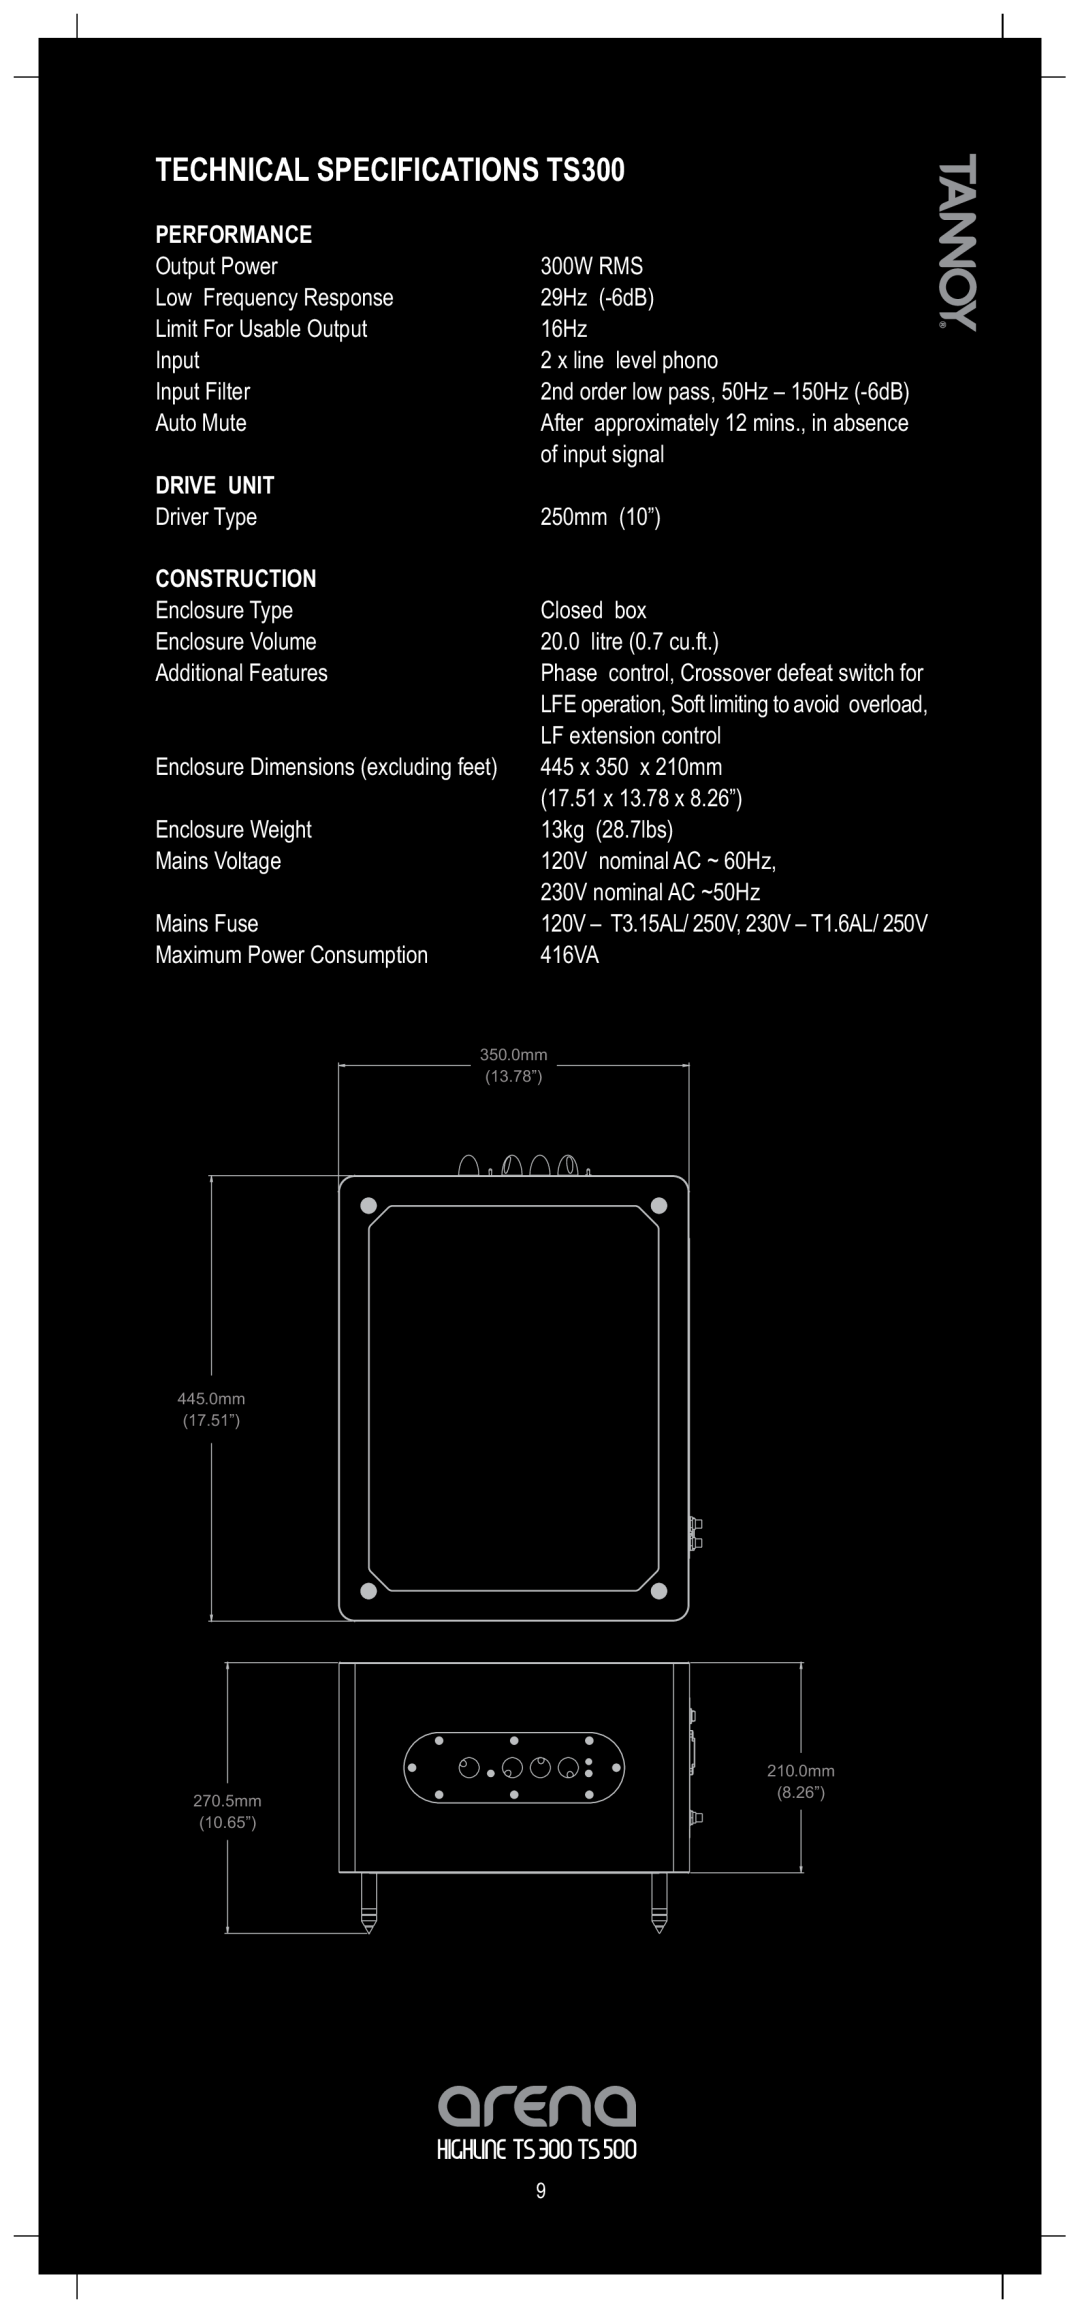 TOA Electronics owner manual TECHNICAL SPECIFICATIONS TS300, Performance, Drive Unit, Construction 